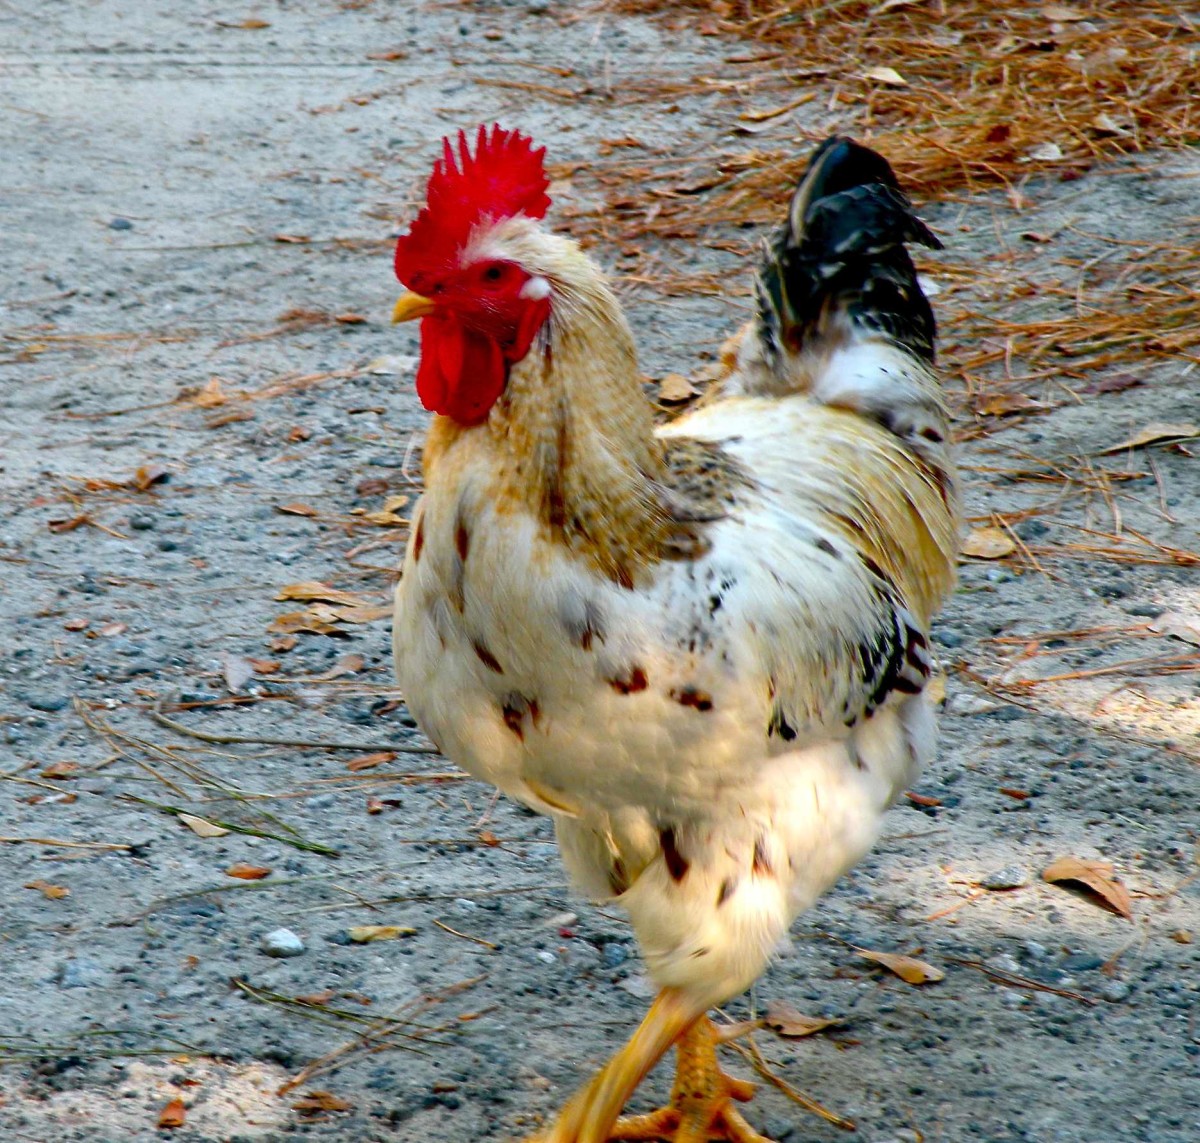 A rooster at Corolla Lighthouse used in "A Lighthouse tour of North Carolina"